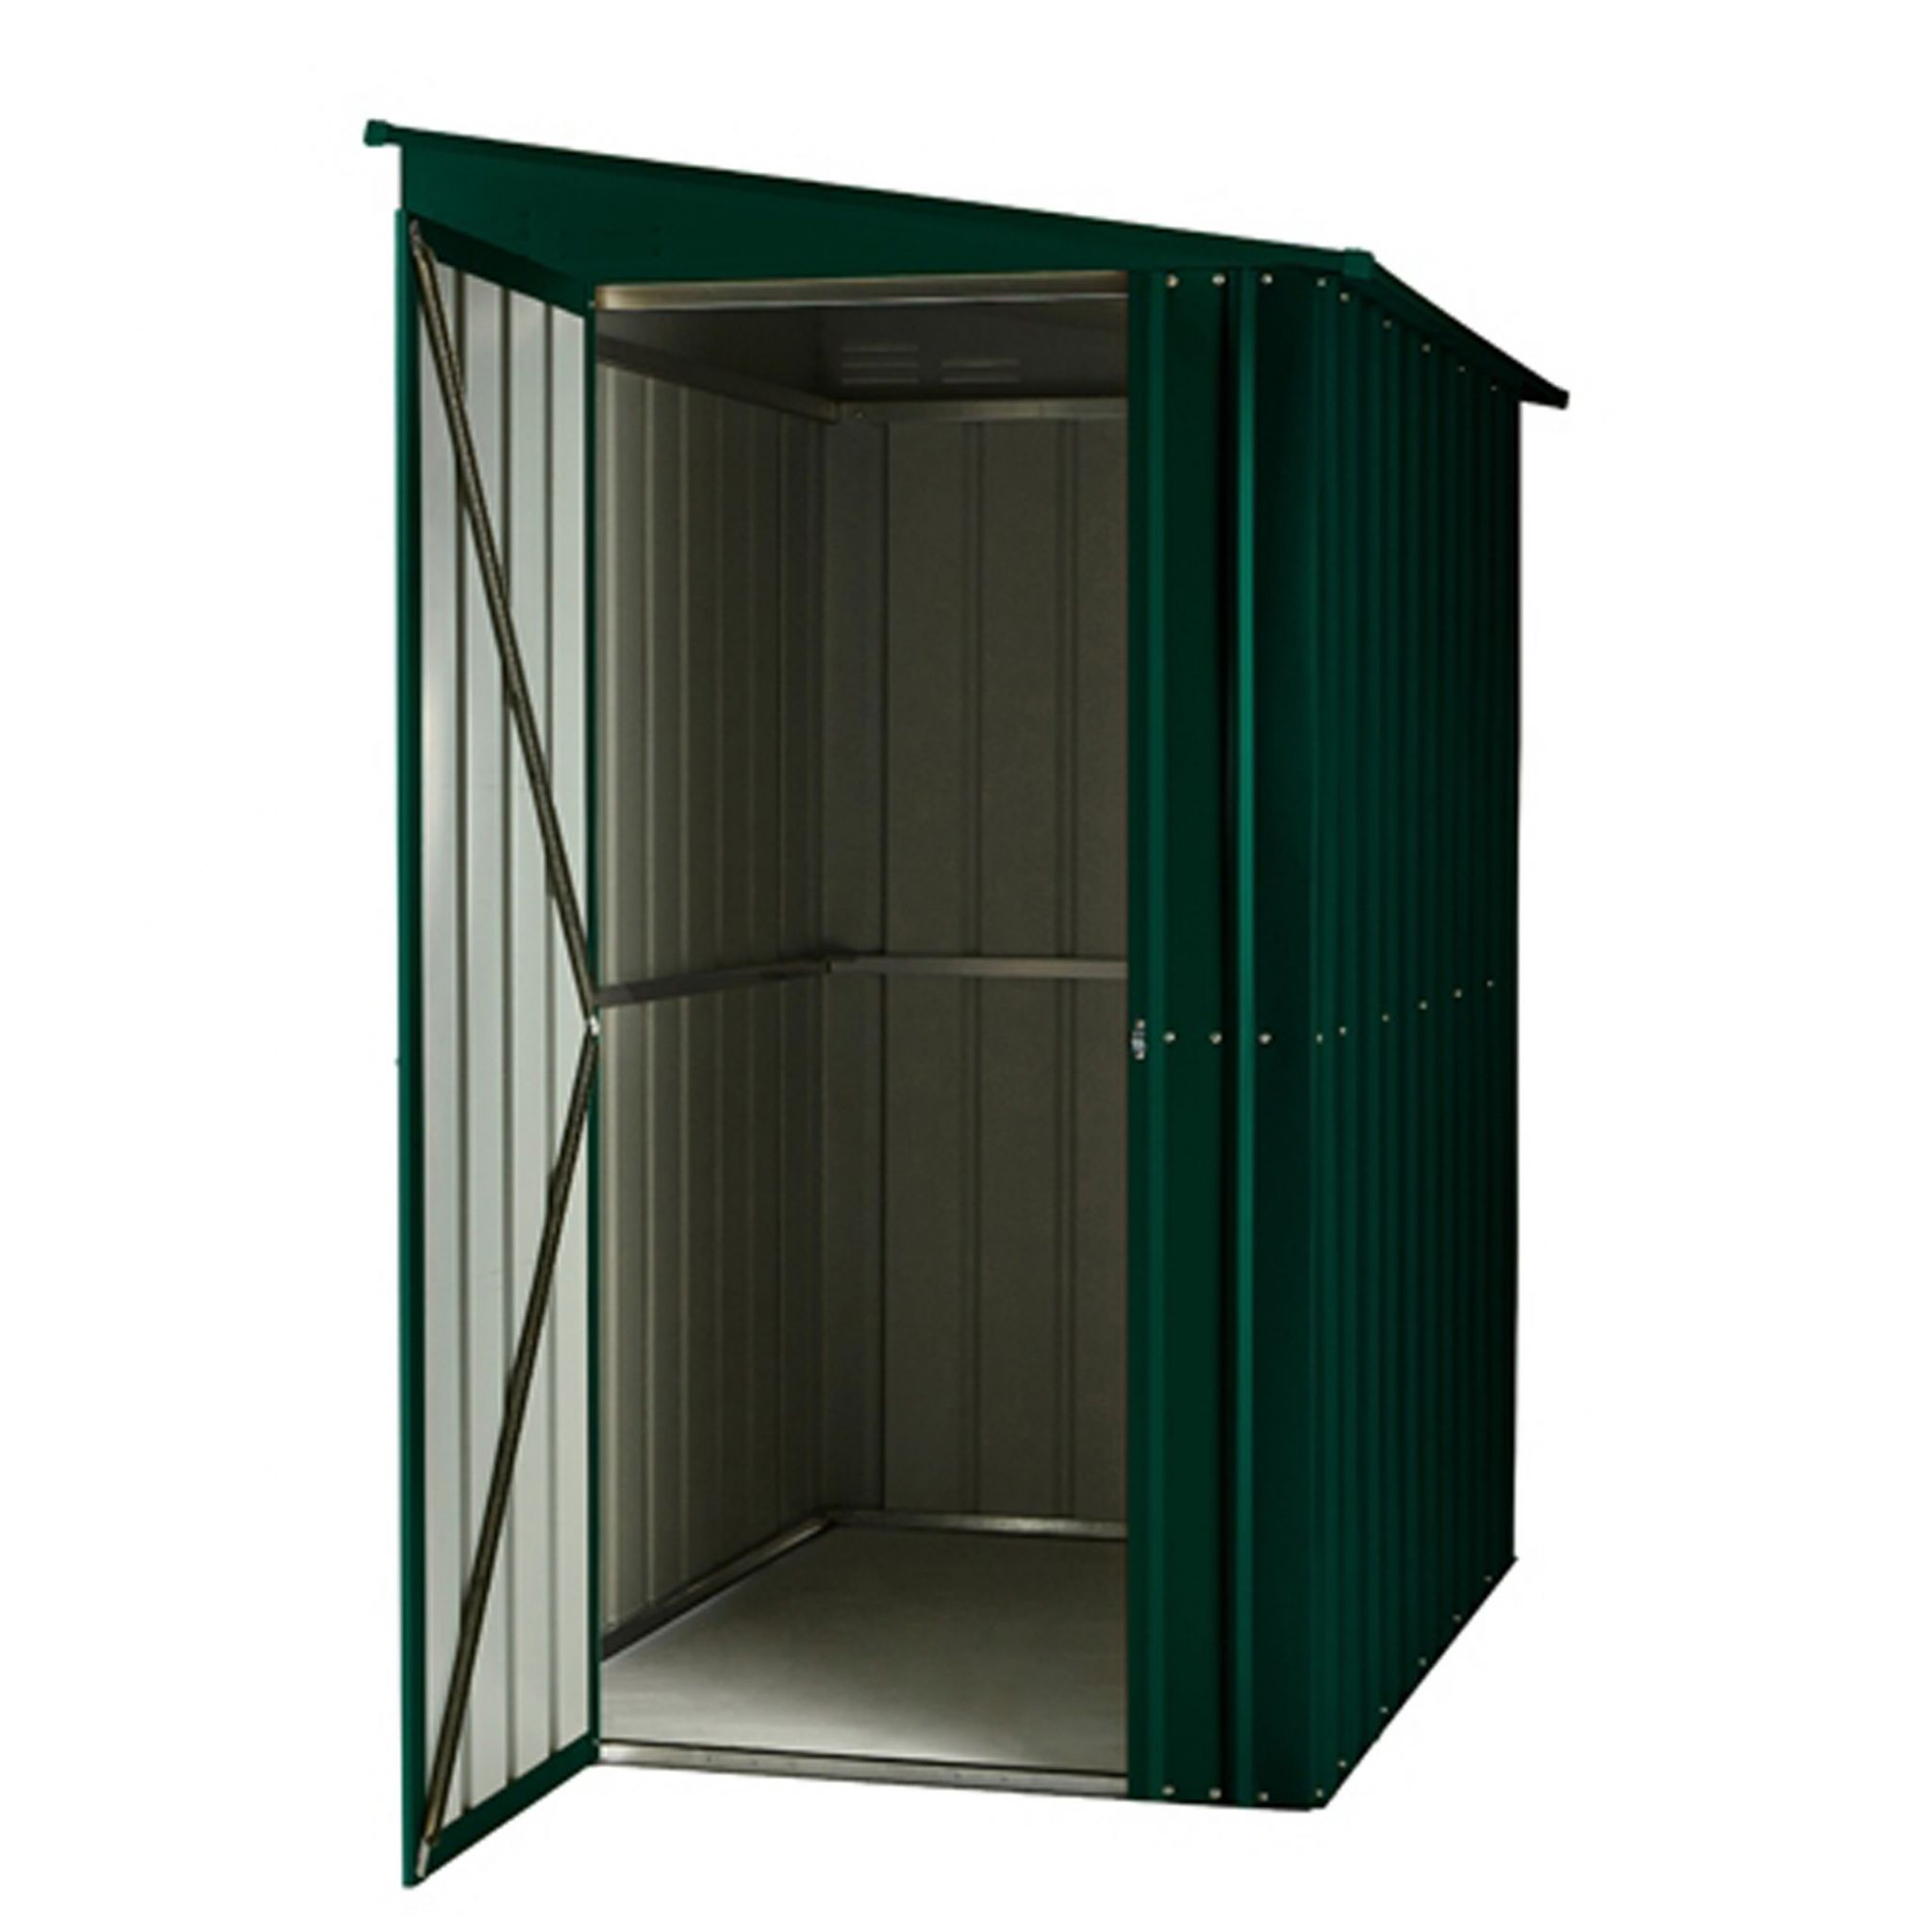 Featured image for “Globel® Lotus™ Lean-To 4x6 Steel Shed”